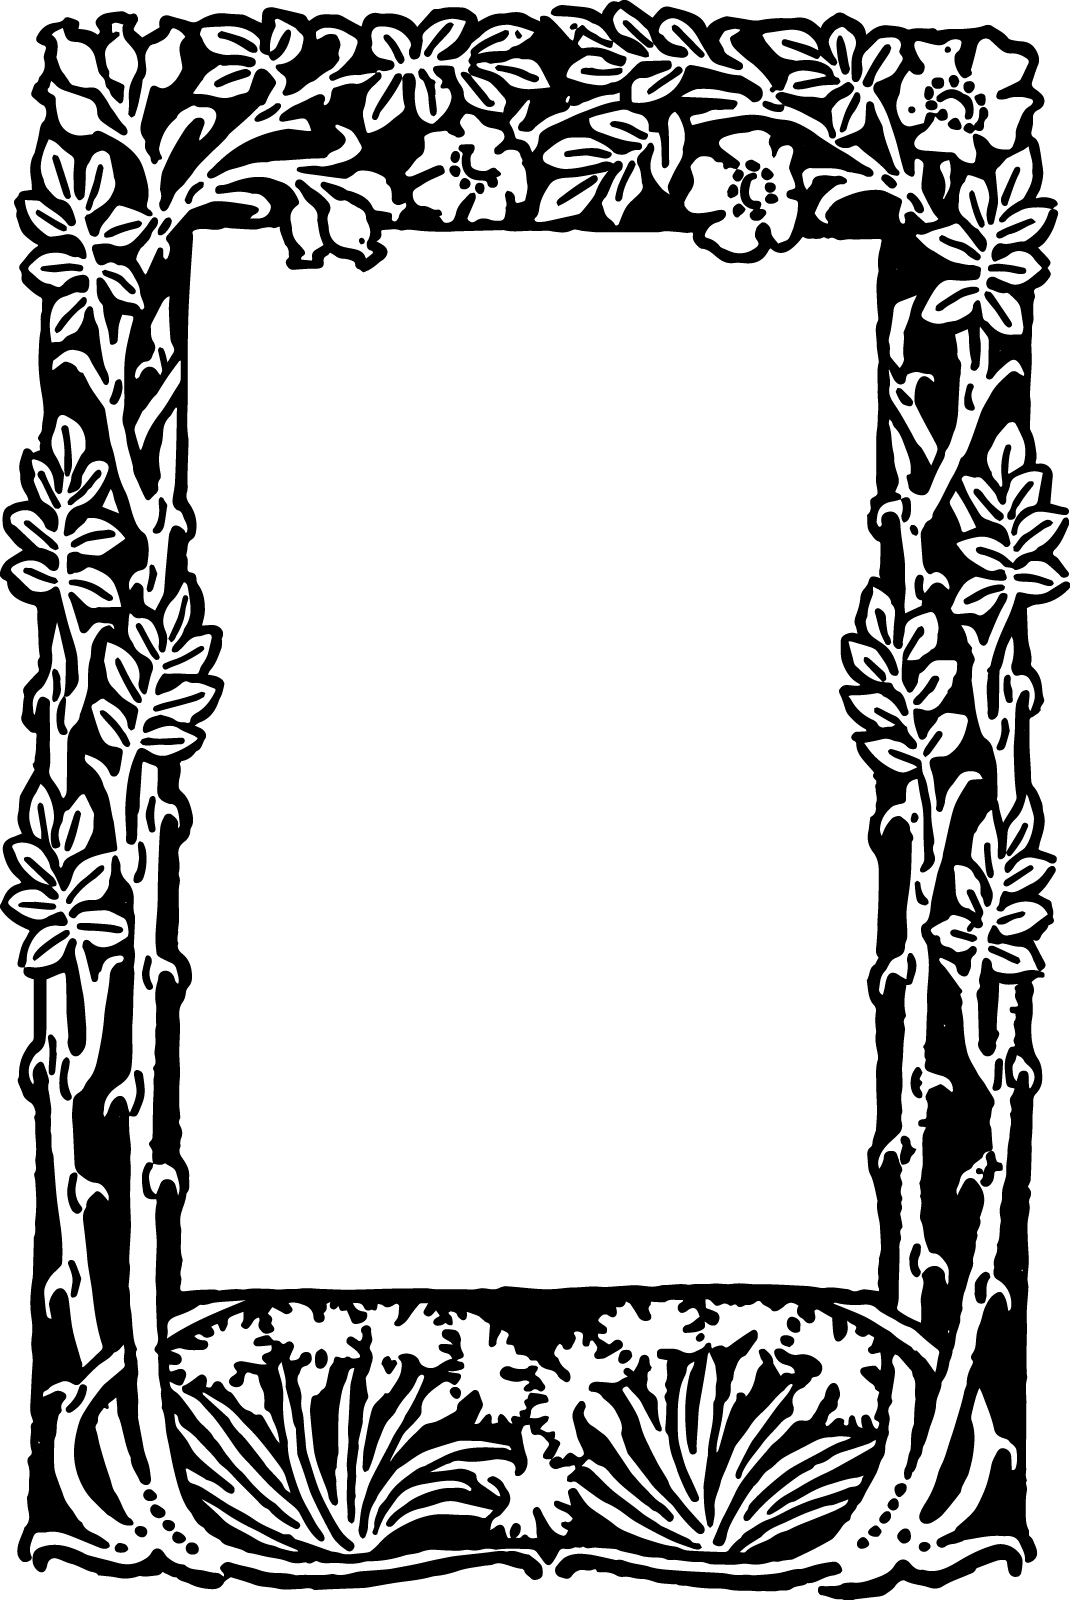 Printable Frames And Borders - ClipArt Best